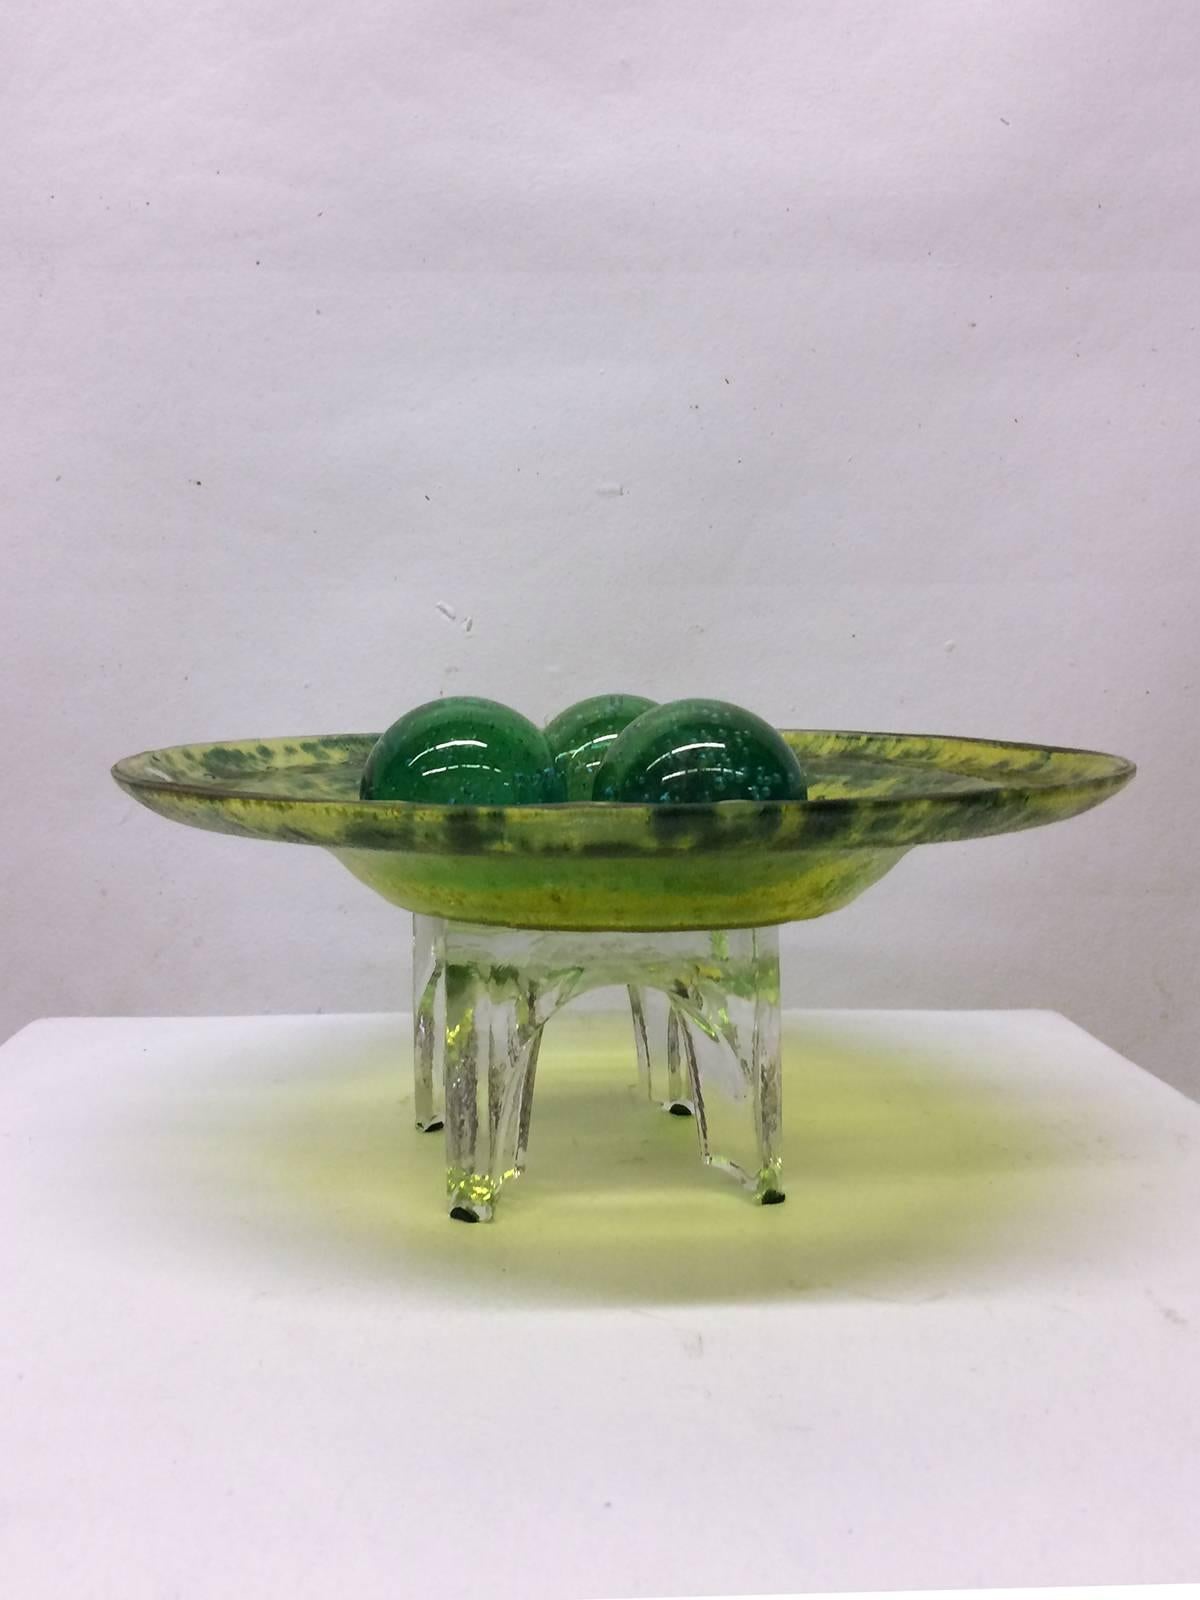 Blown glass bowl and balls on a glass stand. Listing includes five total pieces - three balls, one bowl and one stand. Balls are a grass green color, measure 11" around. Bowl is more of a yellow-green and is 17" in diameter, while the